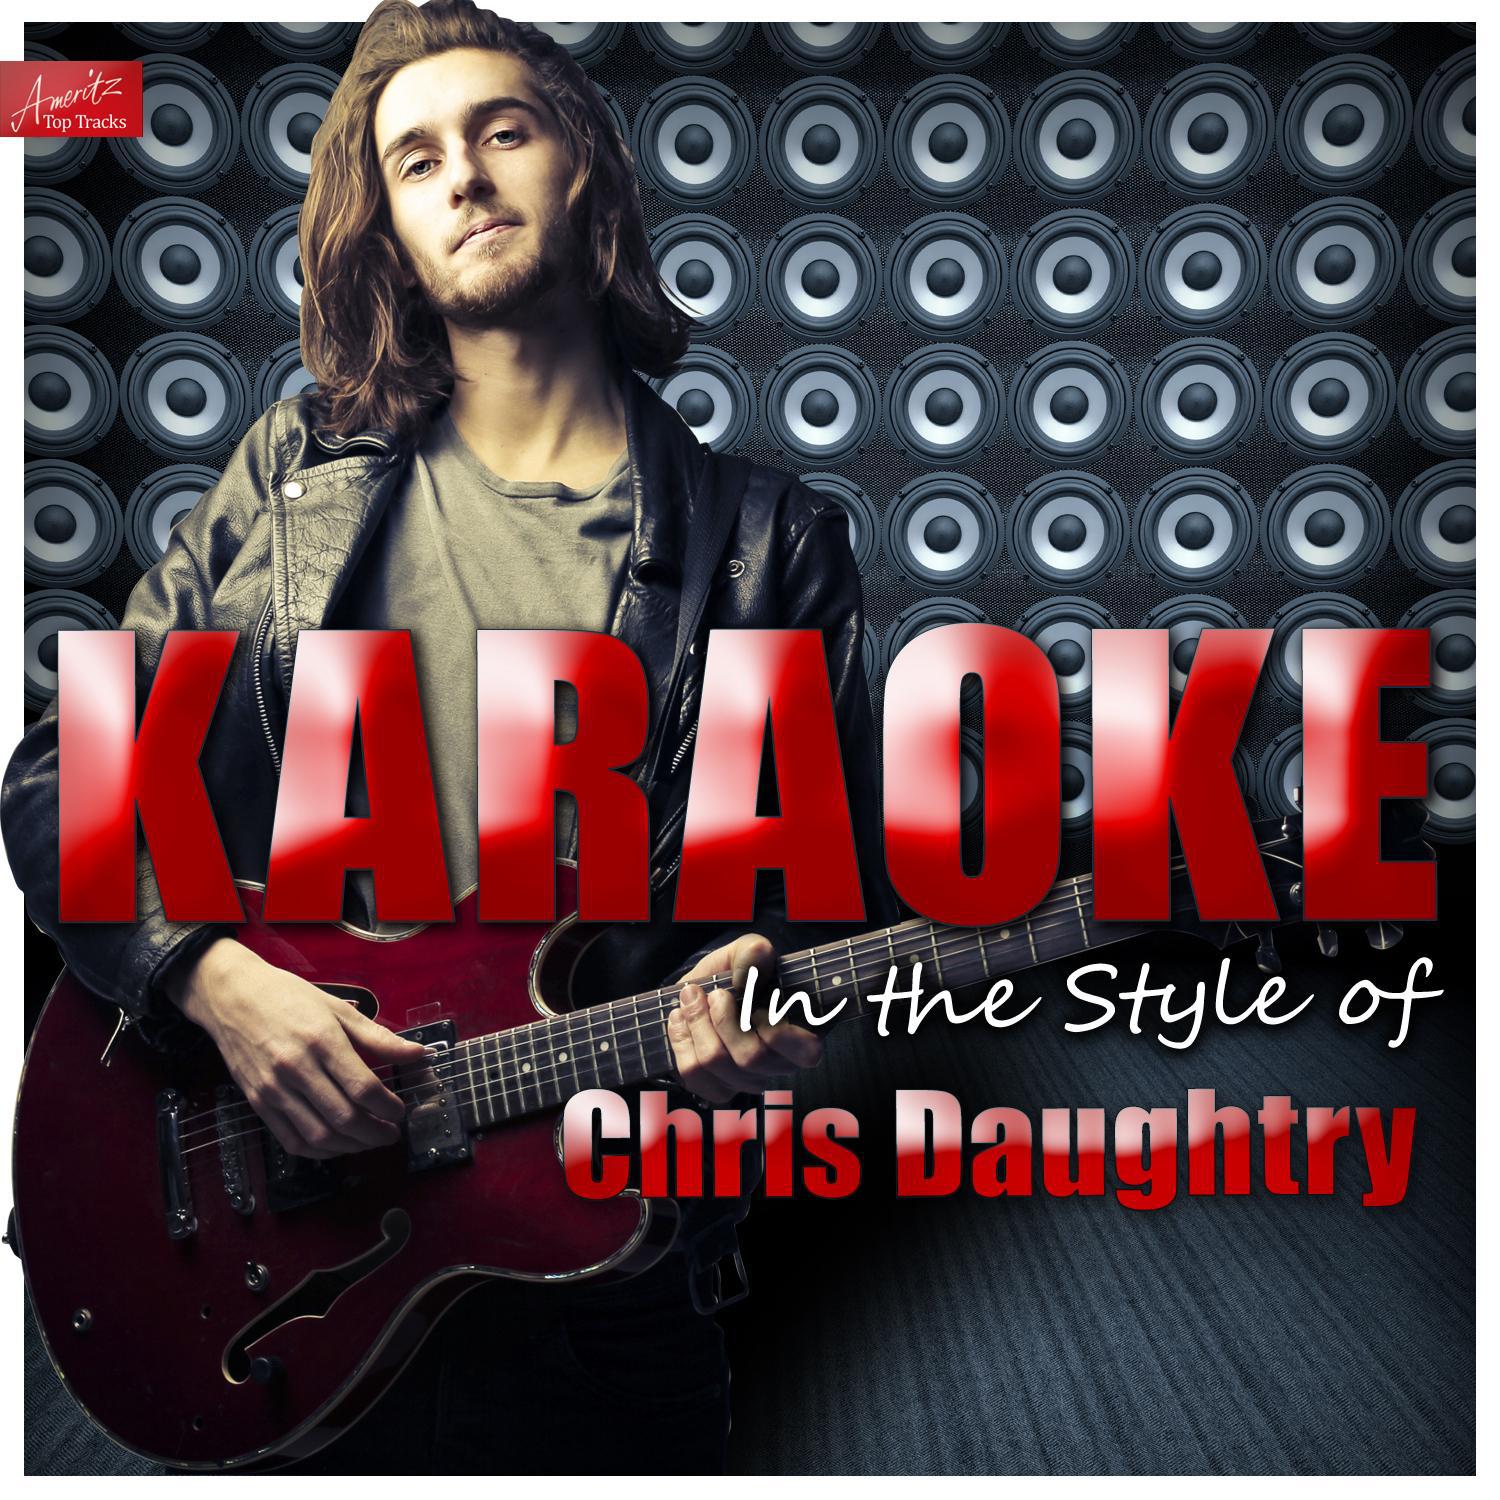 Used To (In the Style of Chris Daughtry) [Karaoke Version]